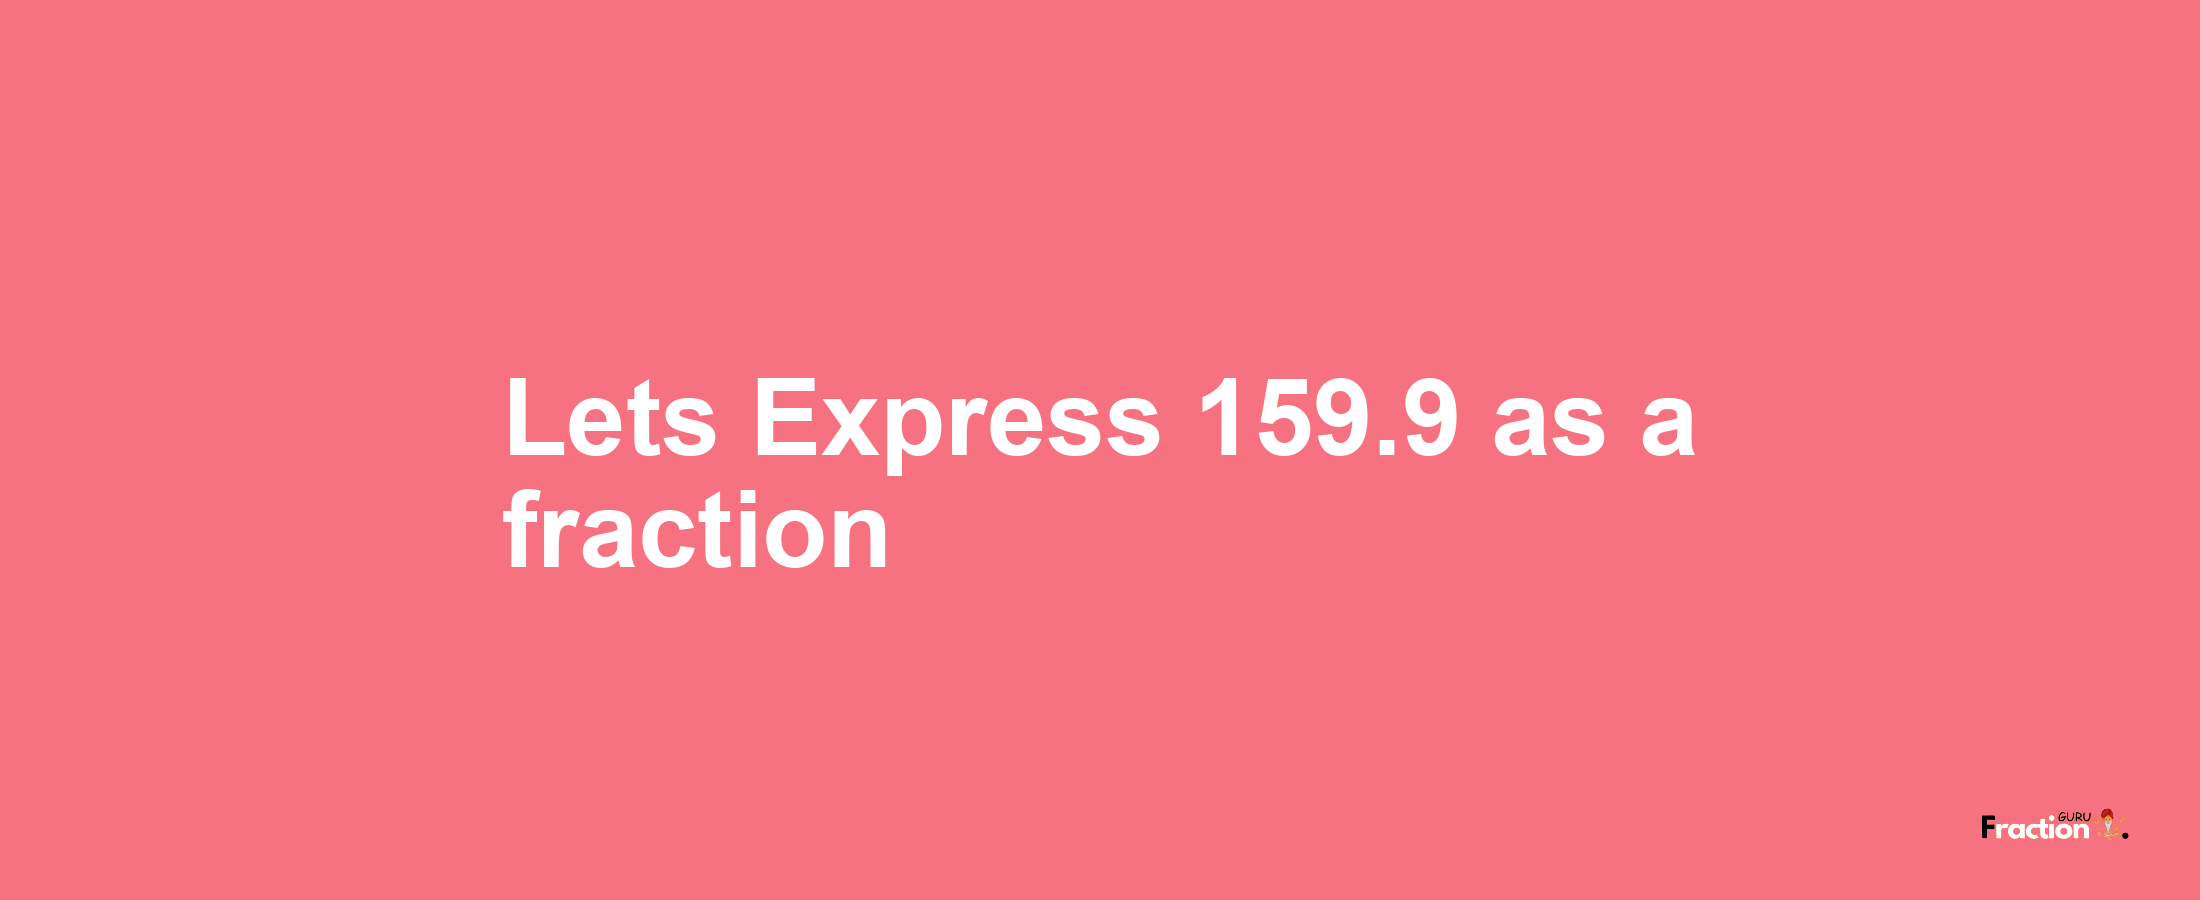 Lets Express 159.9 as afraction